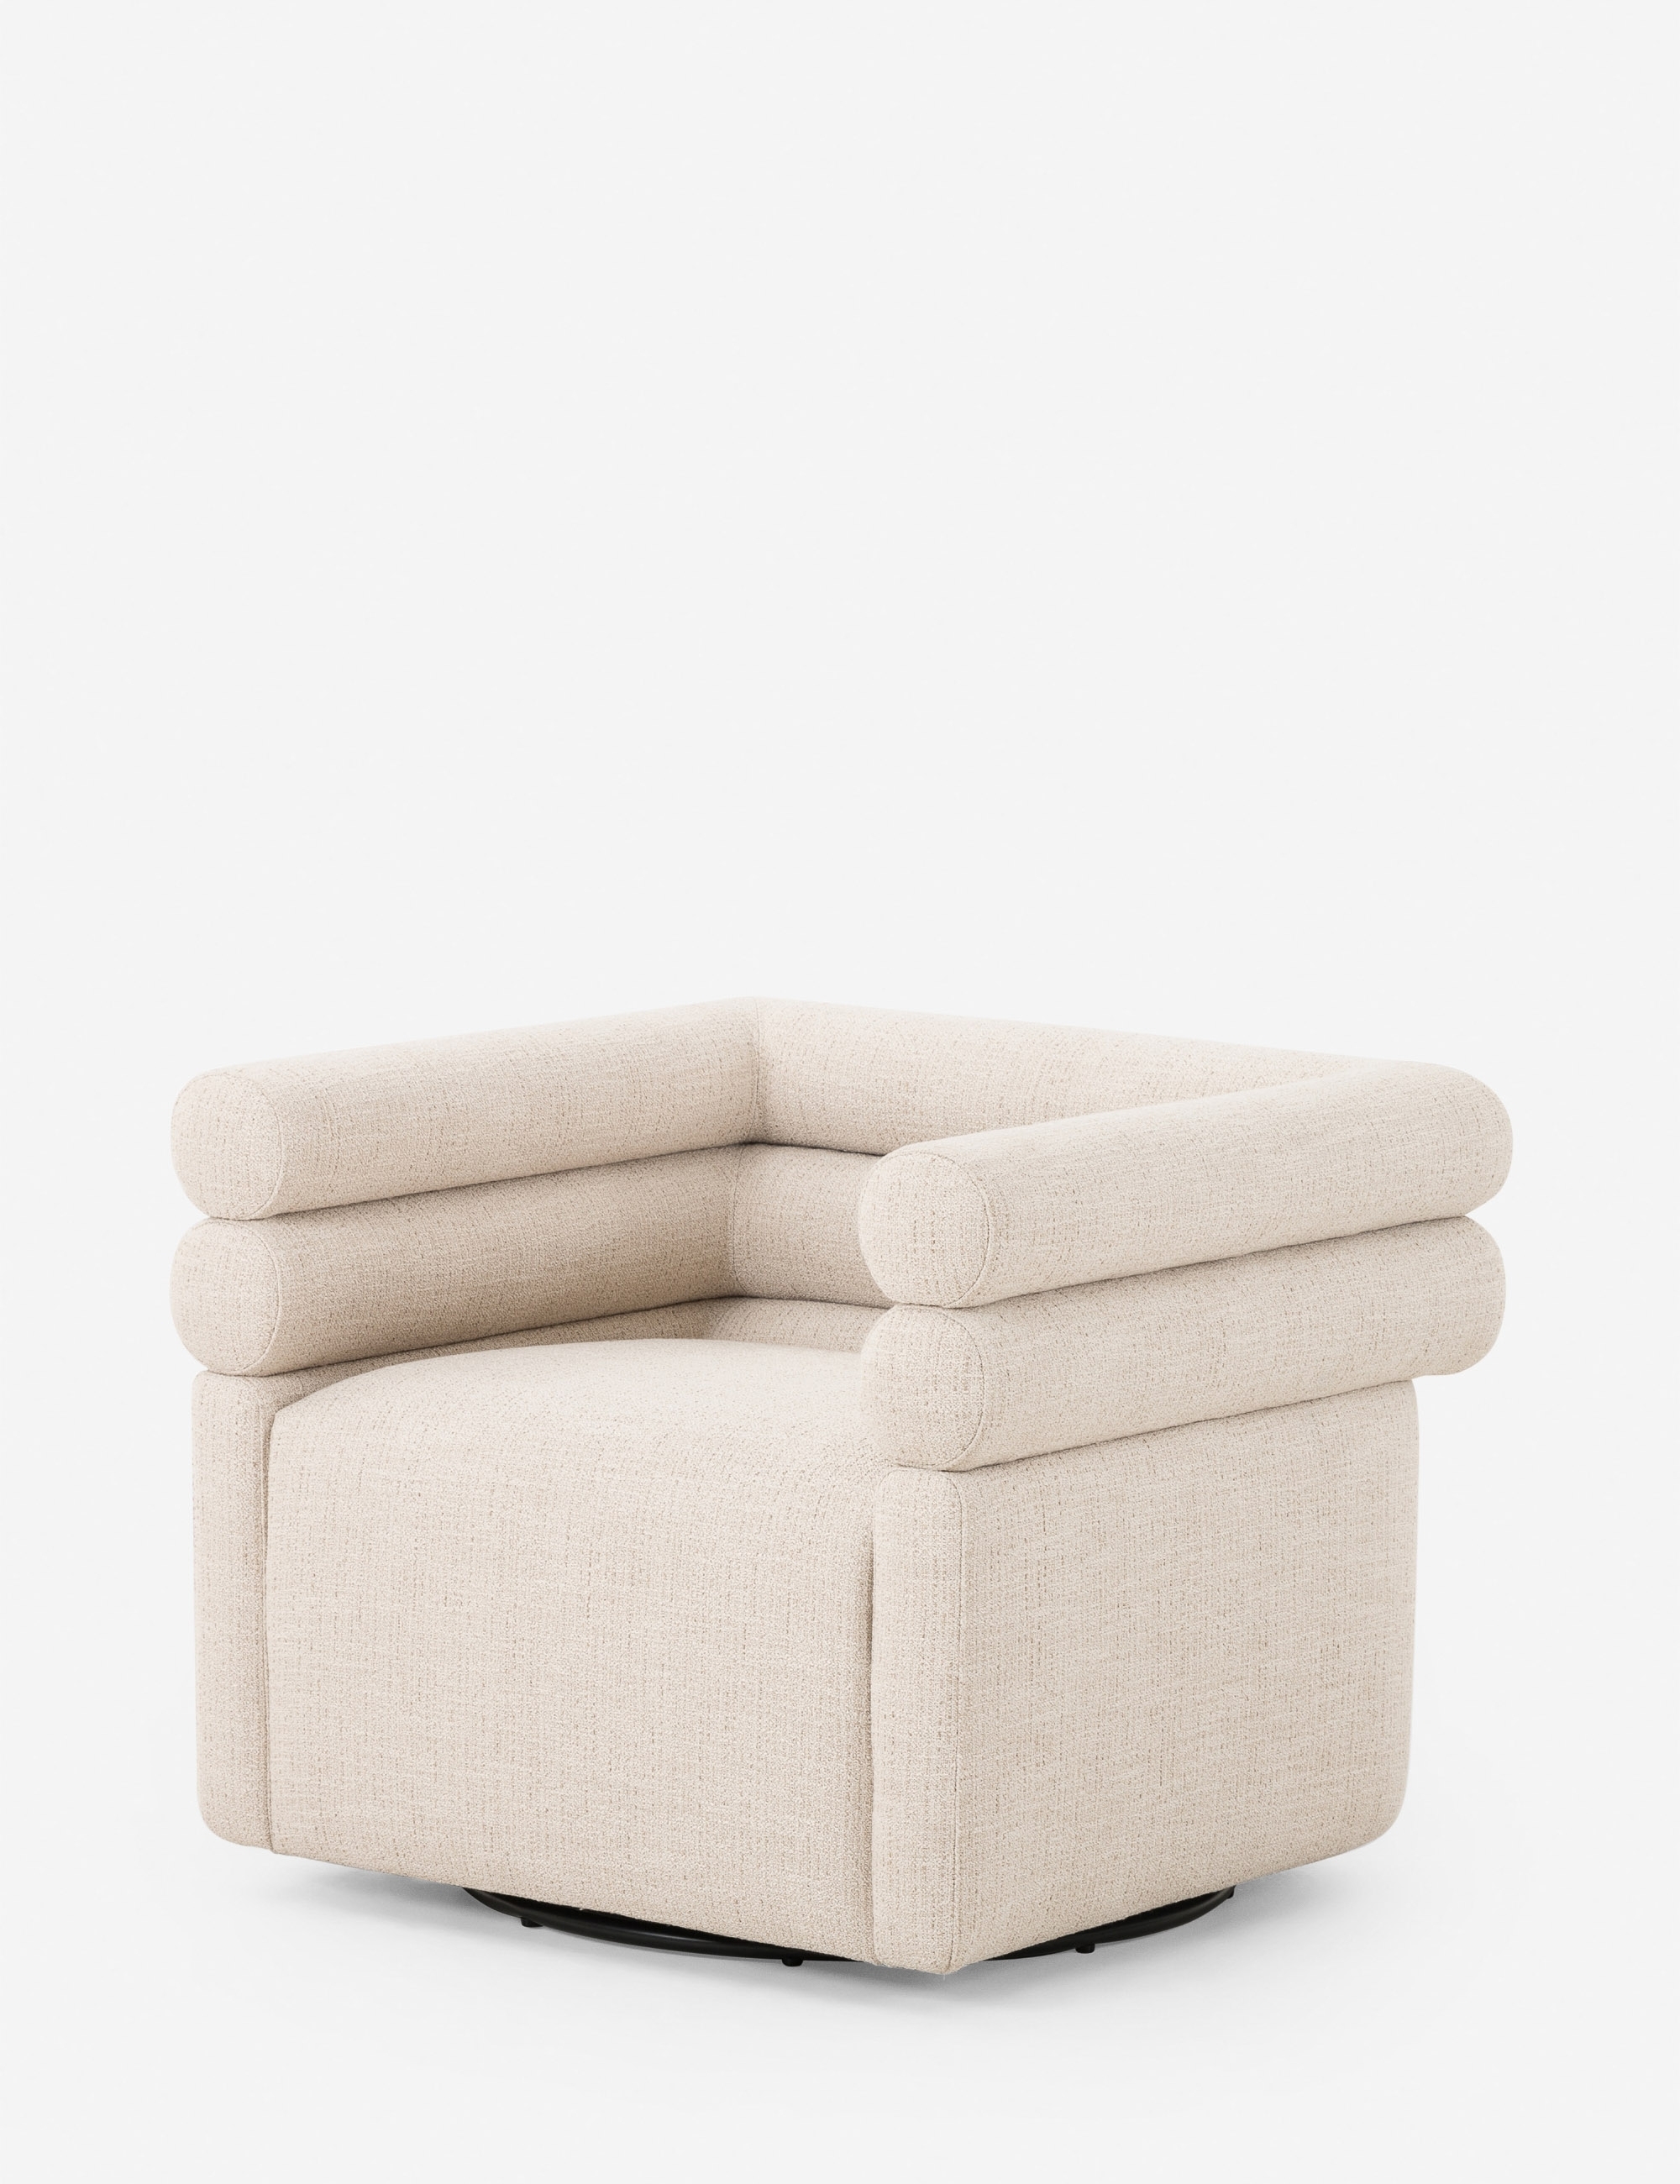 Tomi Swivel Chair - Image 1